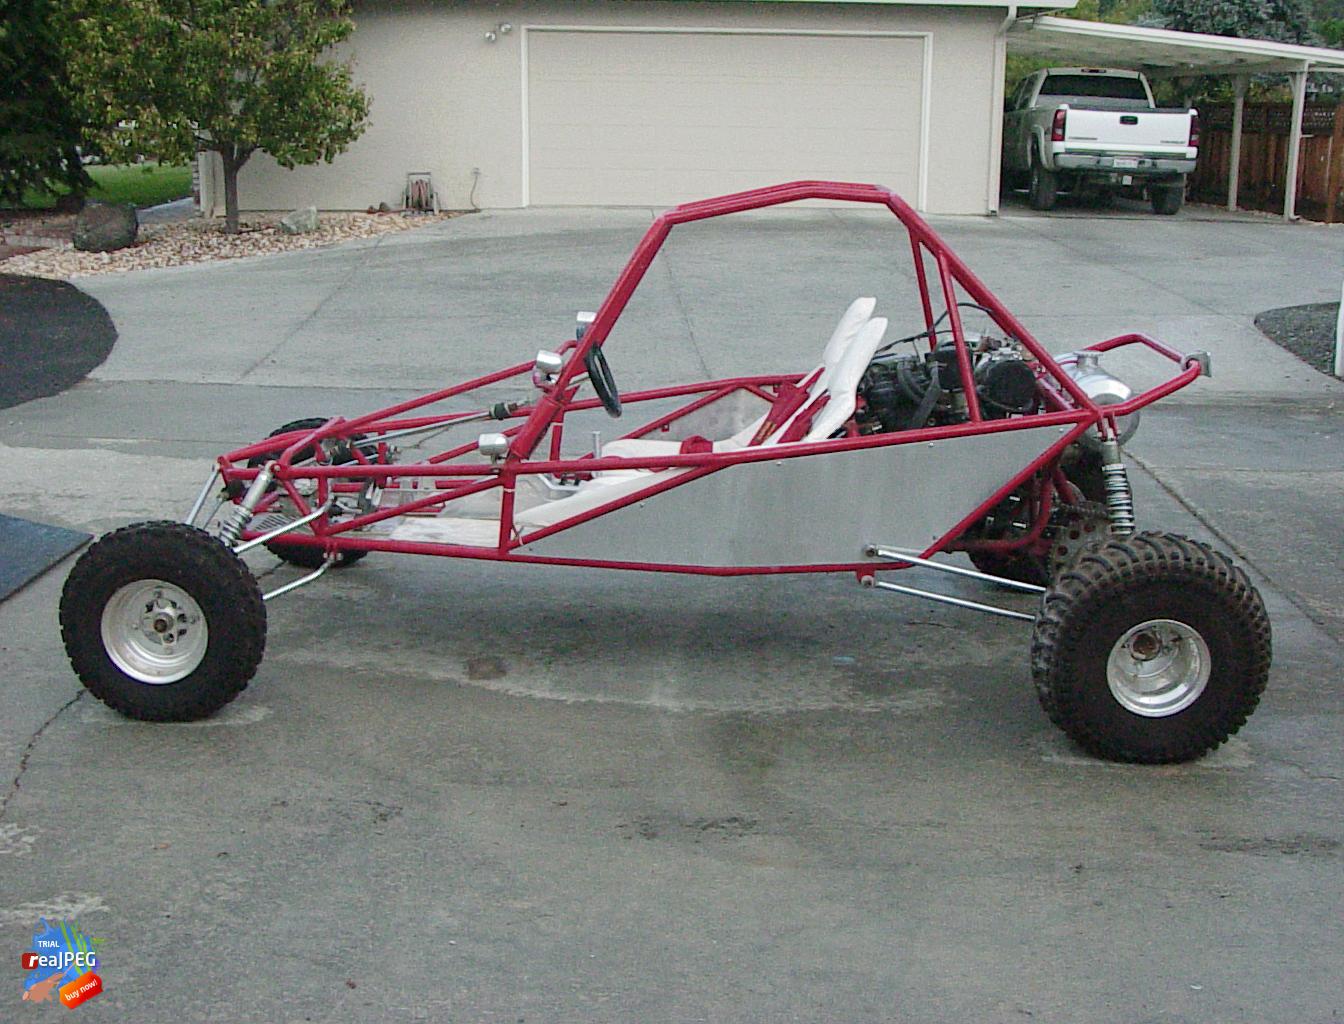 short sand cars for sale